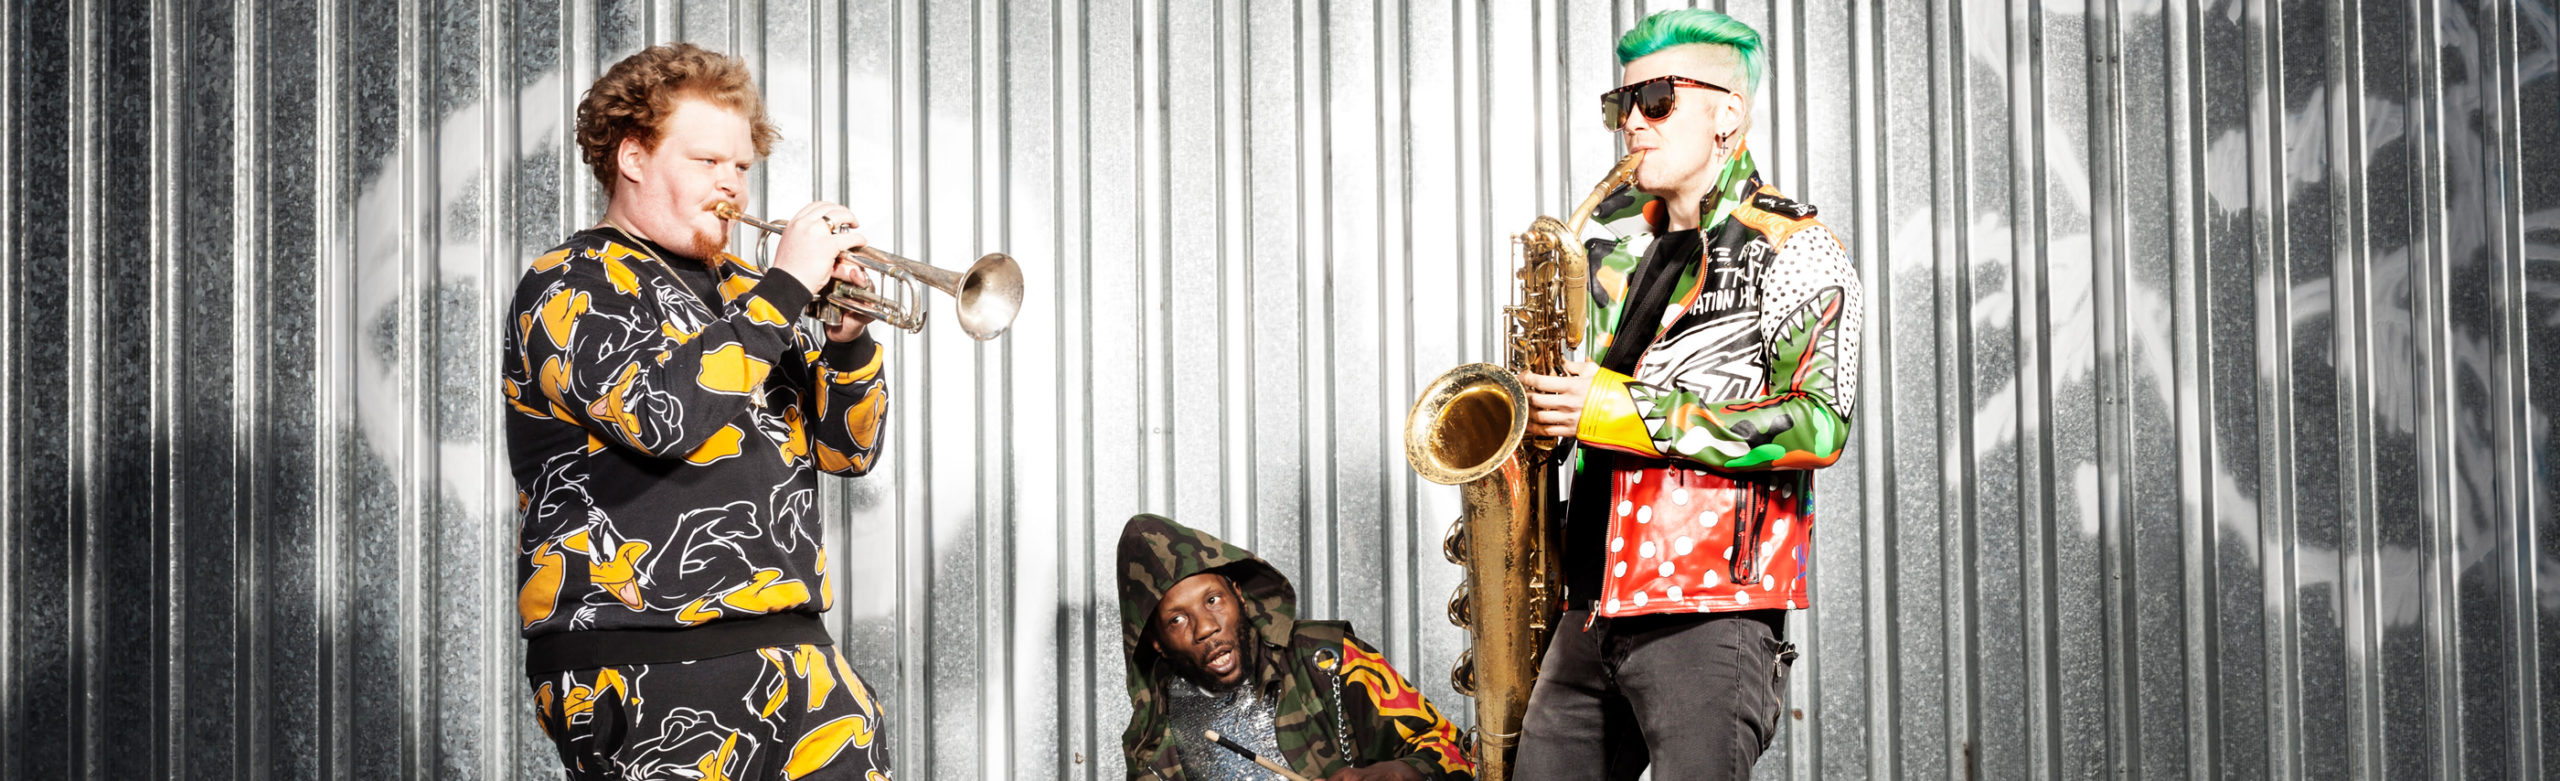 BrassHouse Trio Too Many Zooz Plans Next Concert in Missoula Image